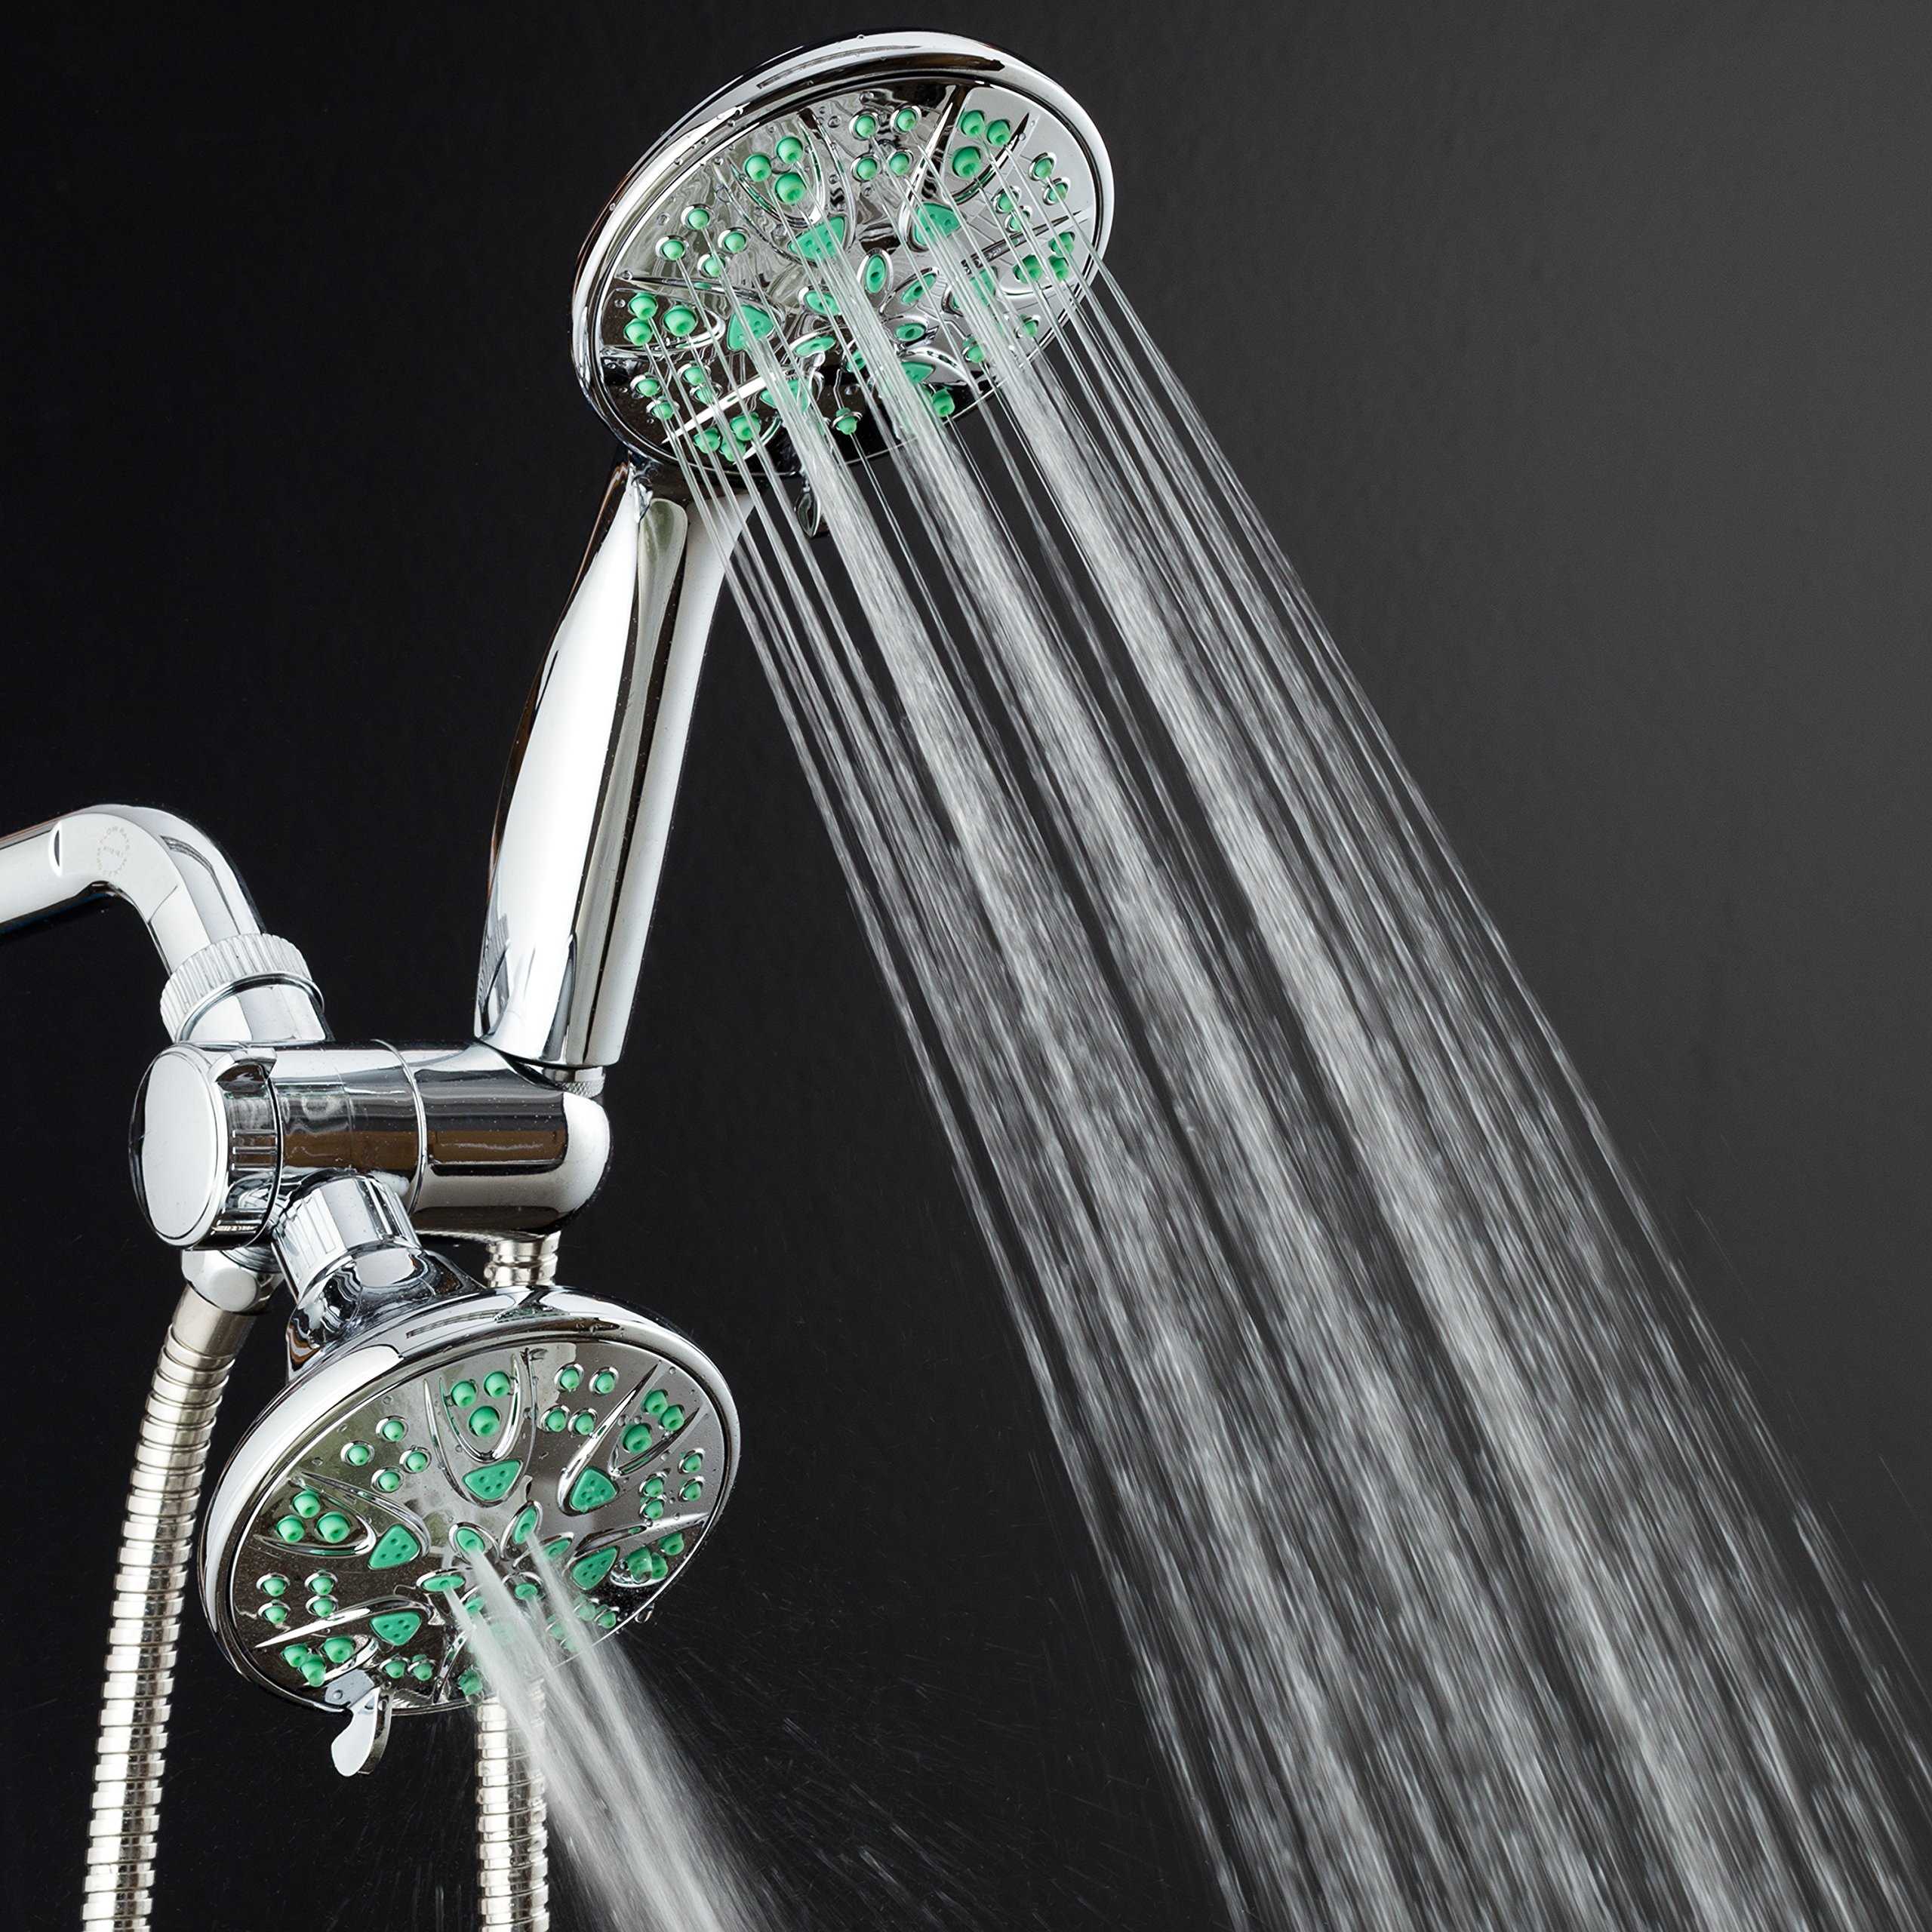 Antimicrobial/Anti-Clog High-Pressure 30-setting Dual Head Combination Shower by AquaDance with Microban Nozzle Protection From Growth of Mold, Mildew & Bacteria for a Healthier Shower– Coral Green